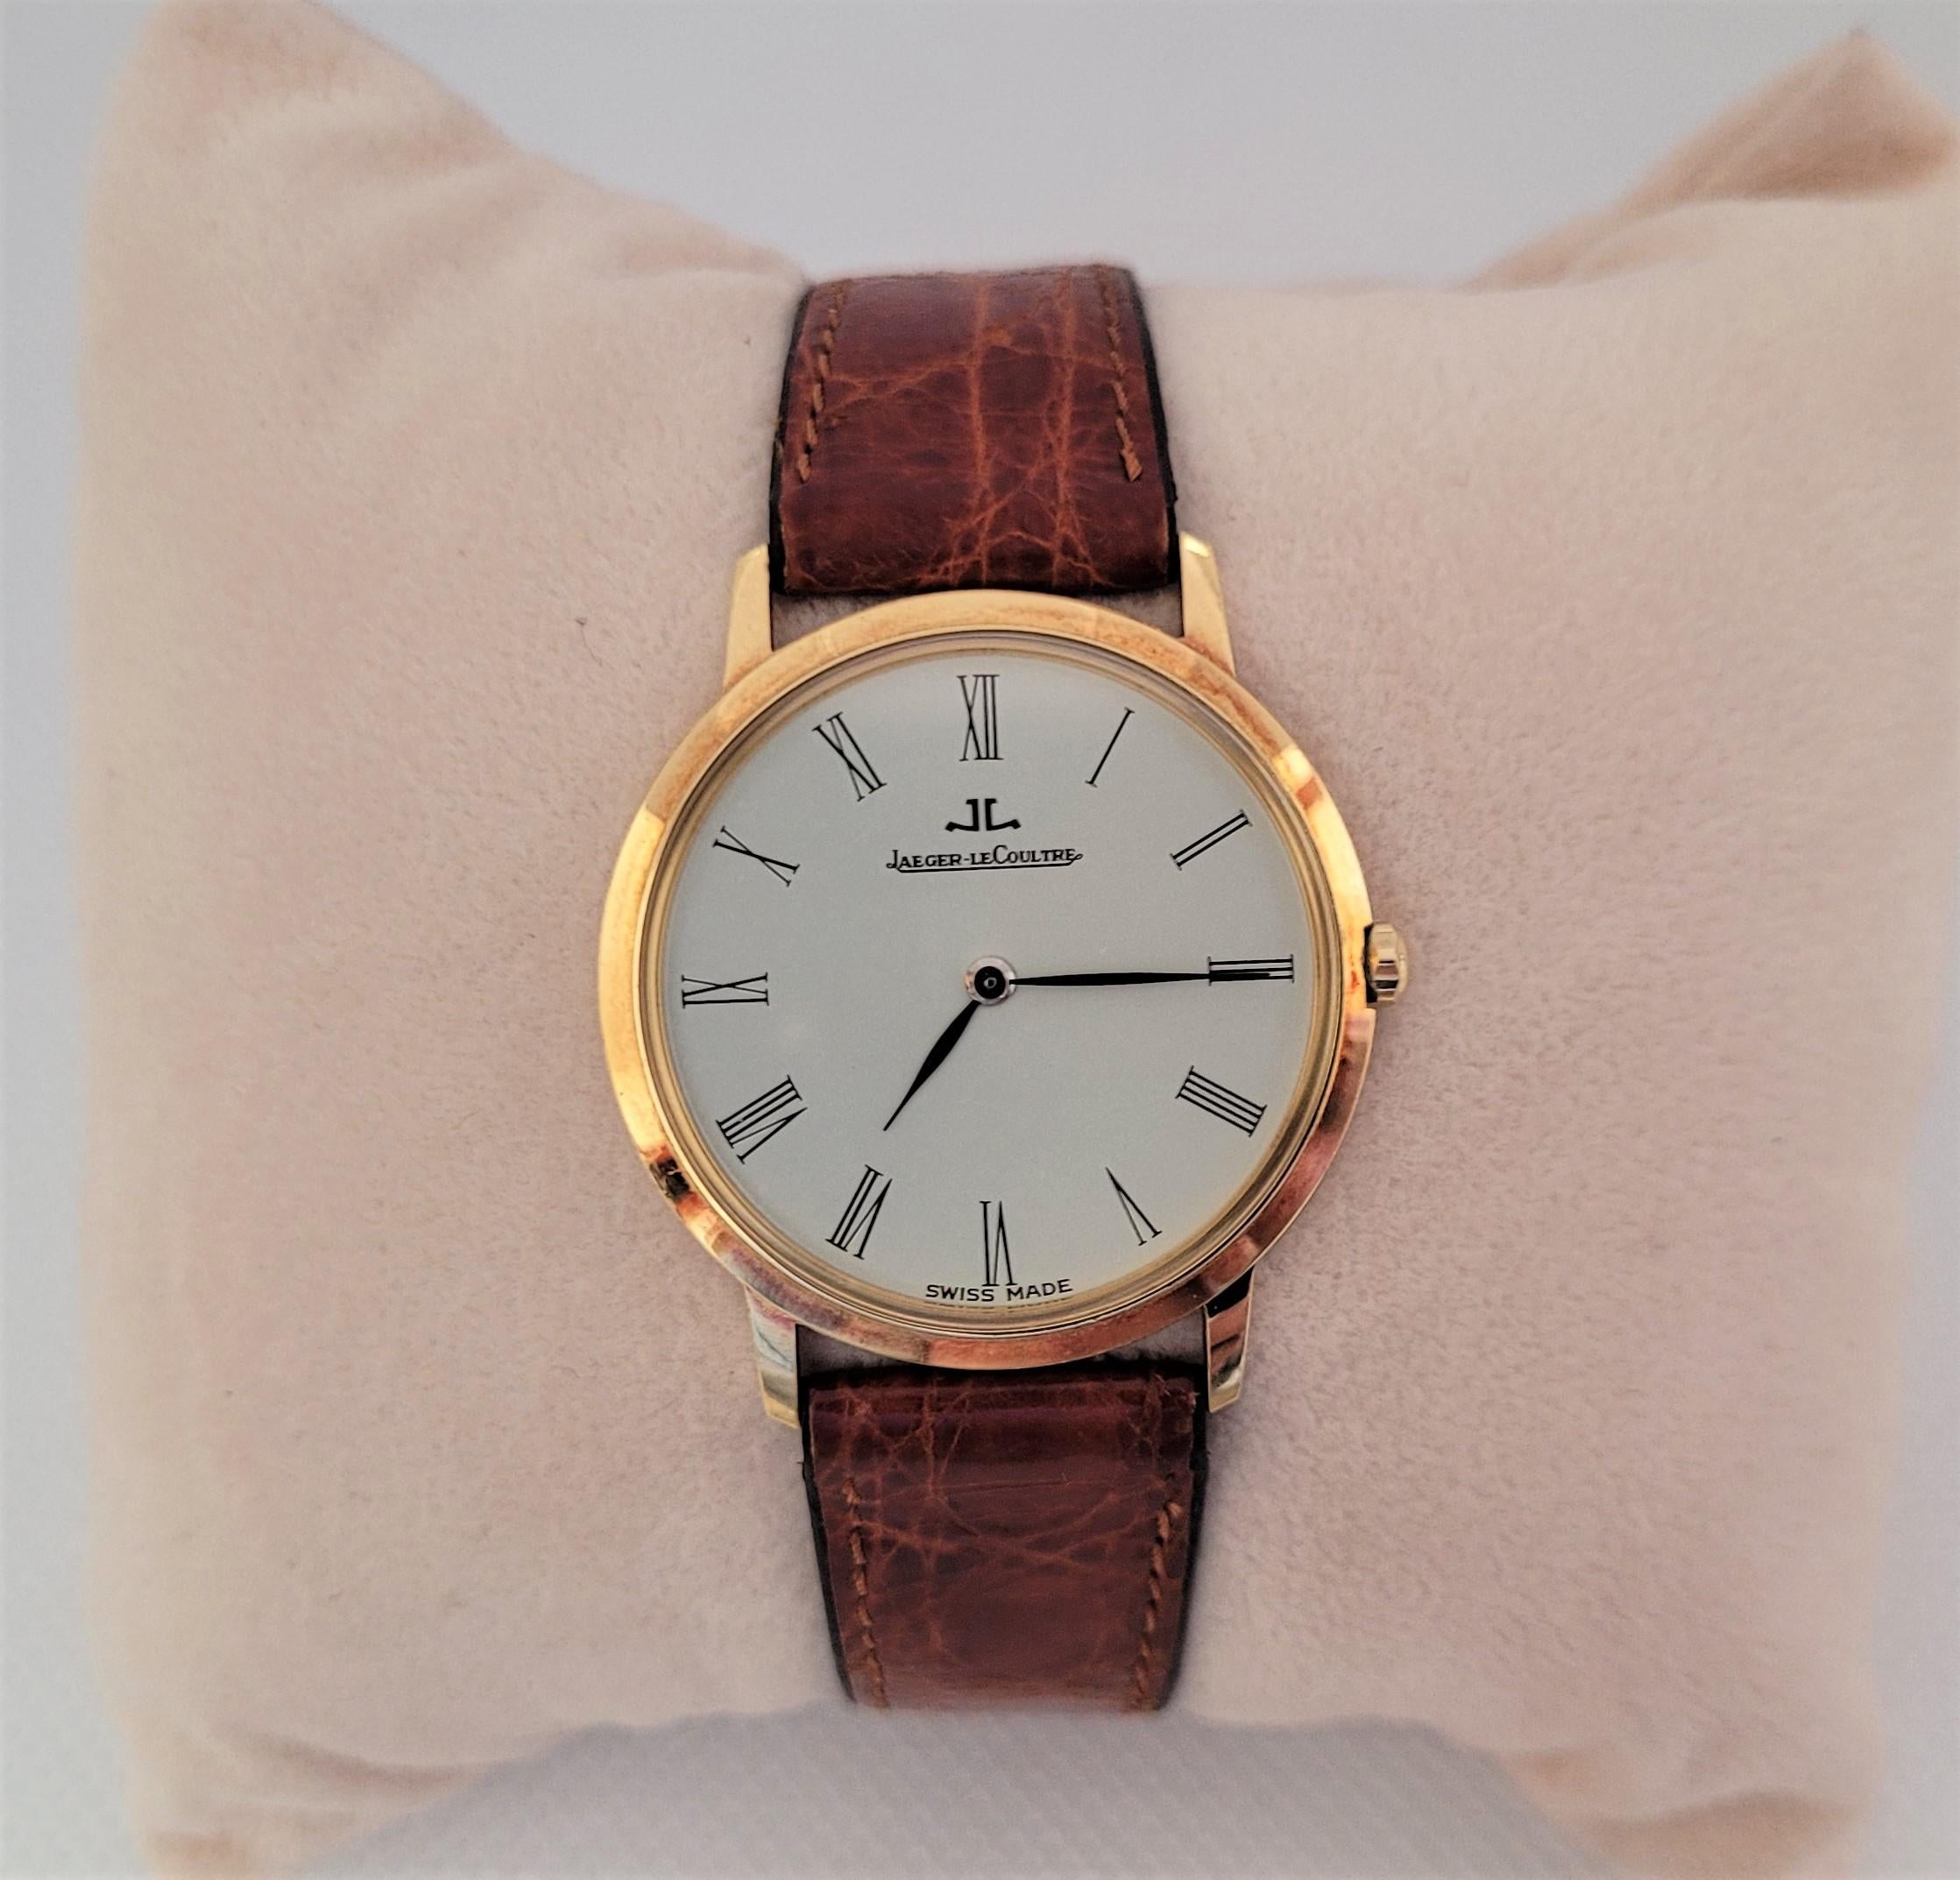 Gorgeous 1990s 18kt yellow gold Jaeger LeCoultre watch with a 30mm case that has a white face with a very clean glass crystal. The case is 4mm thick and stamped on the back 141.117.1 1605511. The manual movement is in good working condition and has